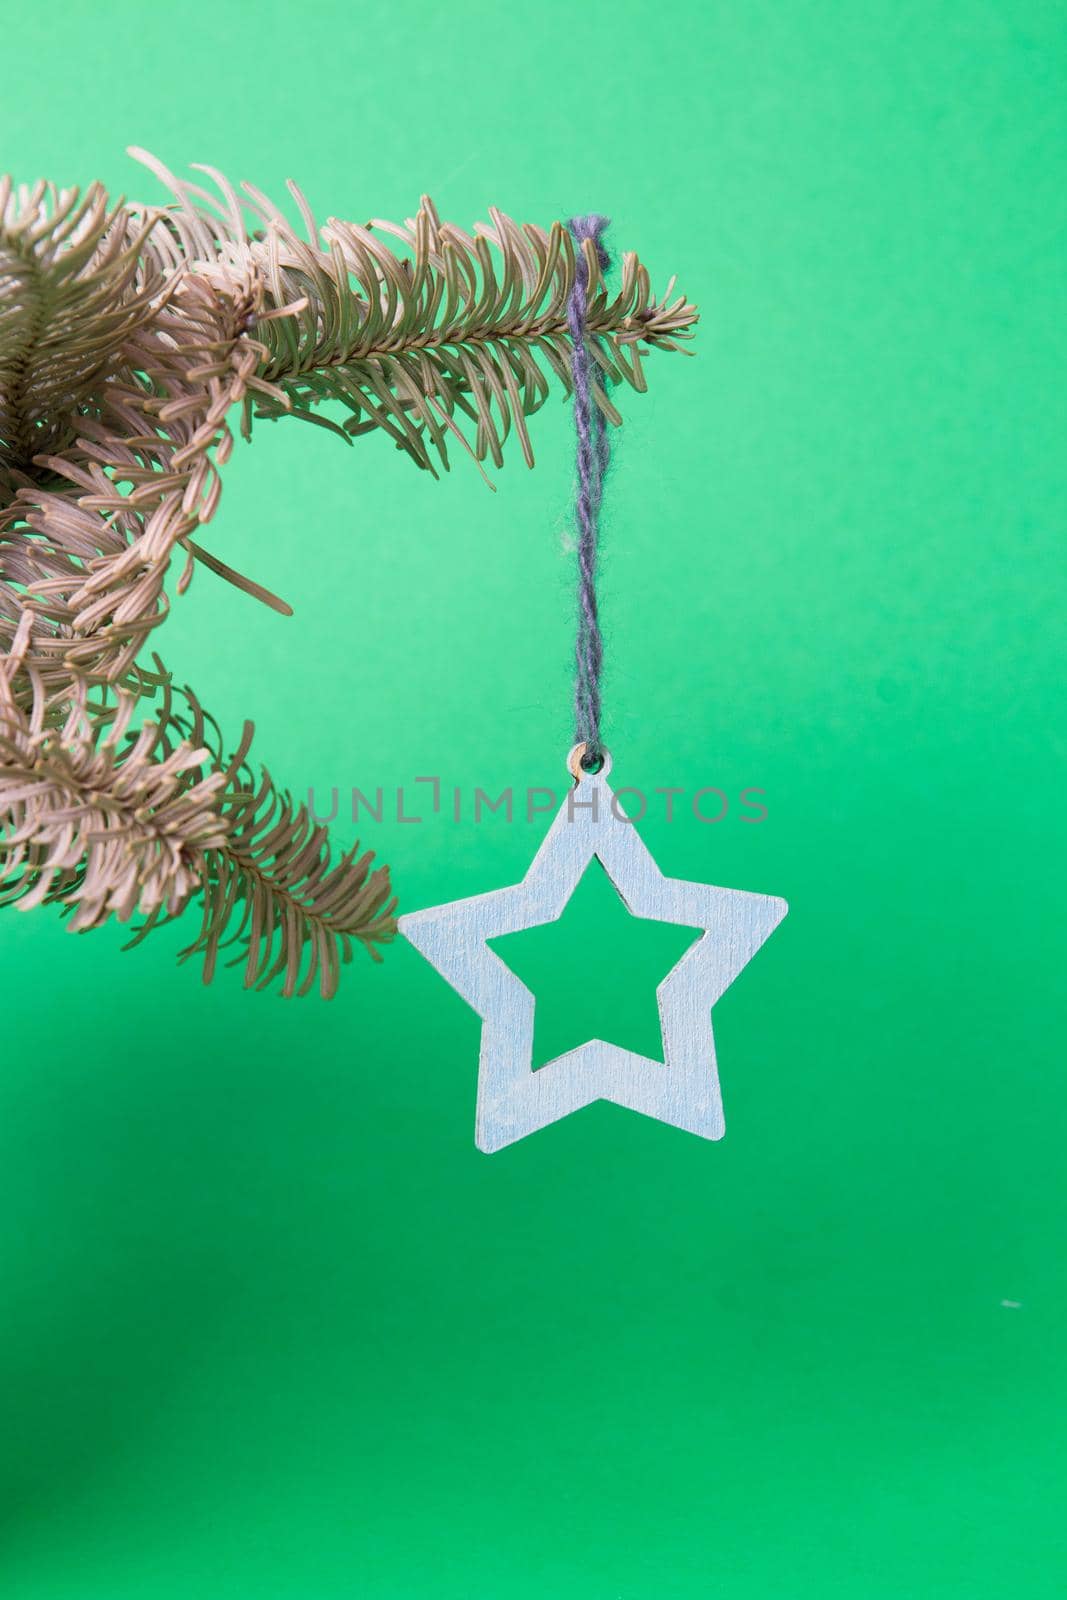 Christmas tree toy in the shape of a star hanging on a decorative spruce branch on a green background